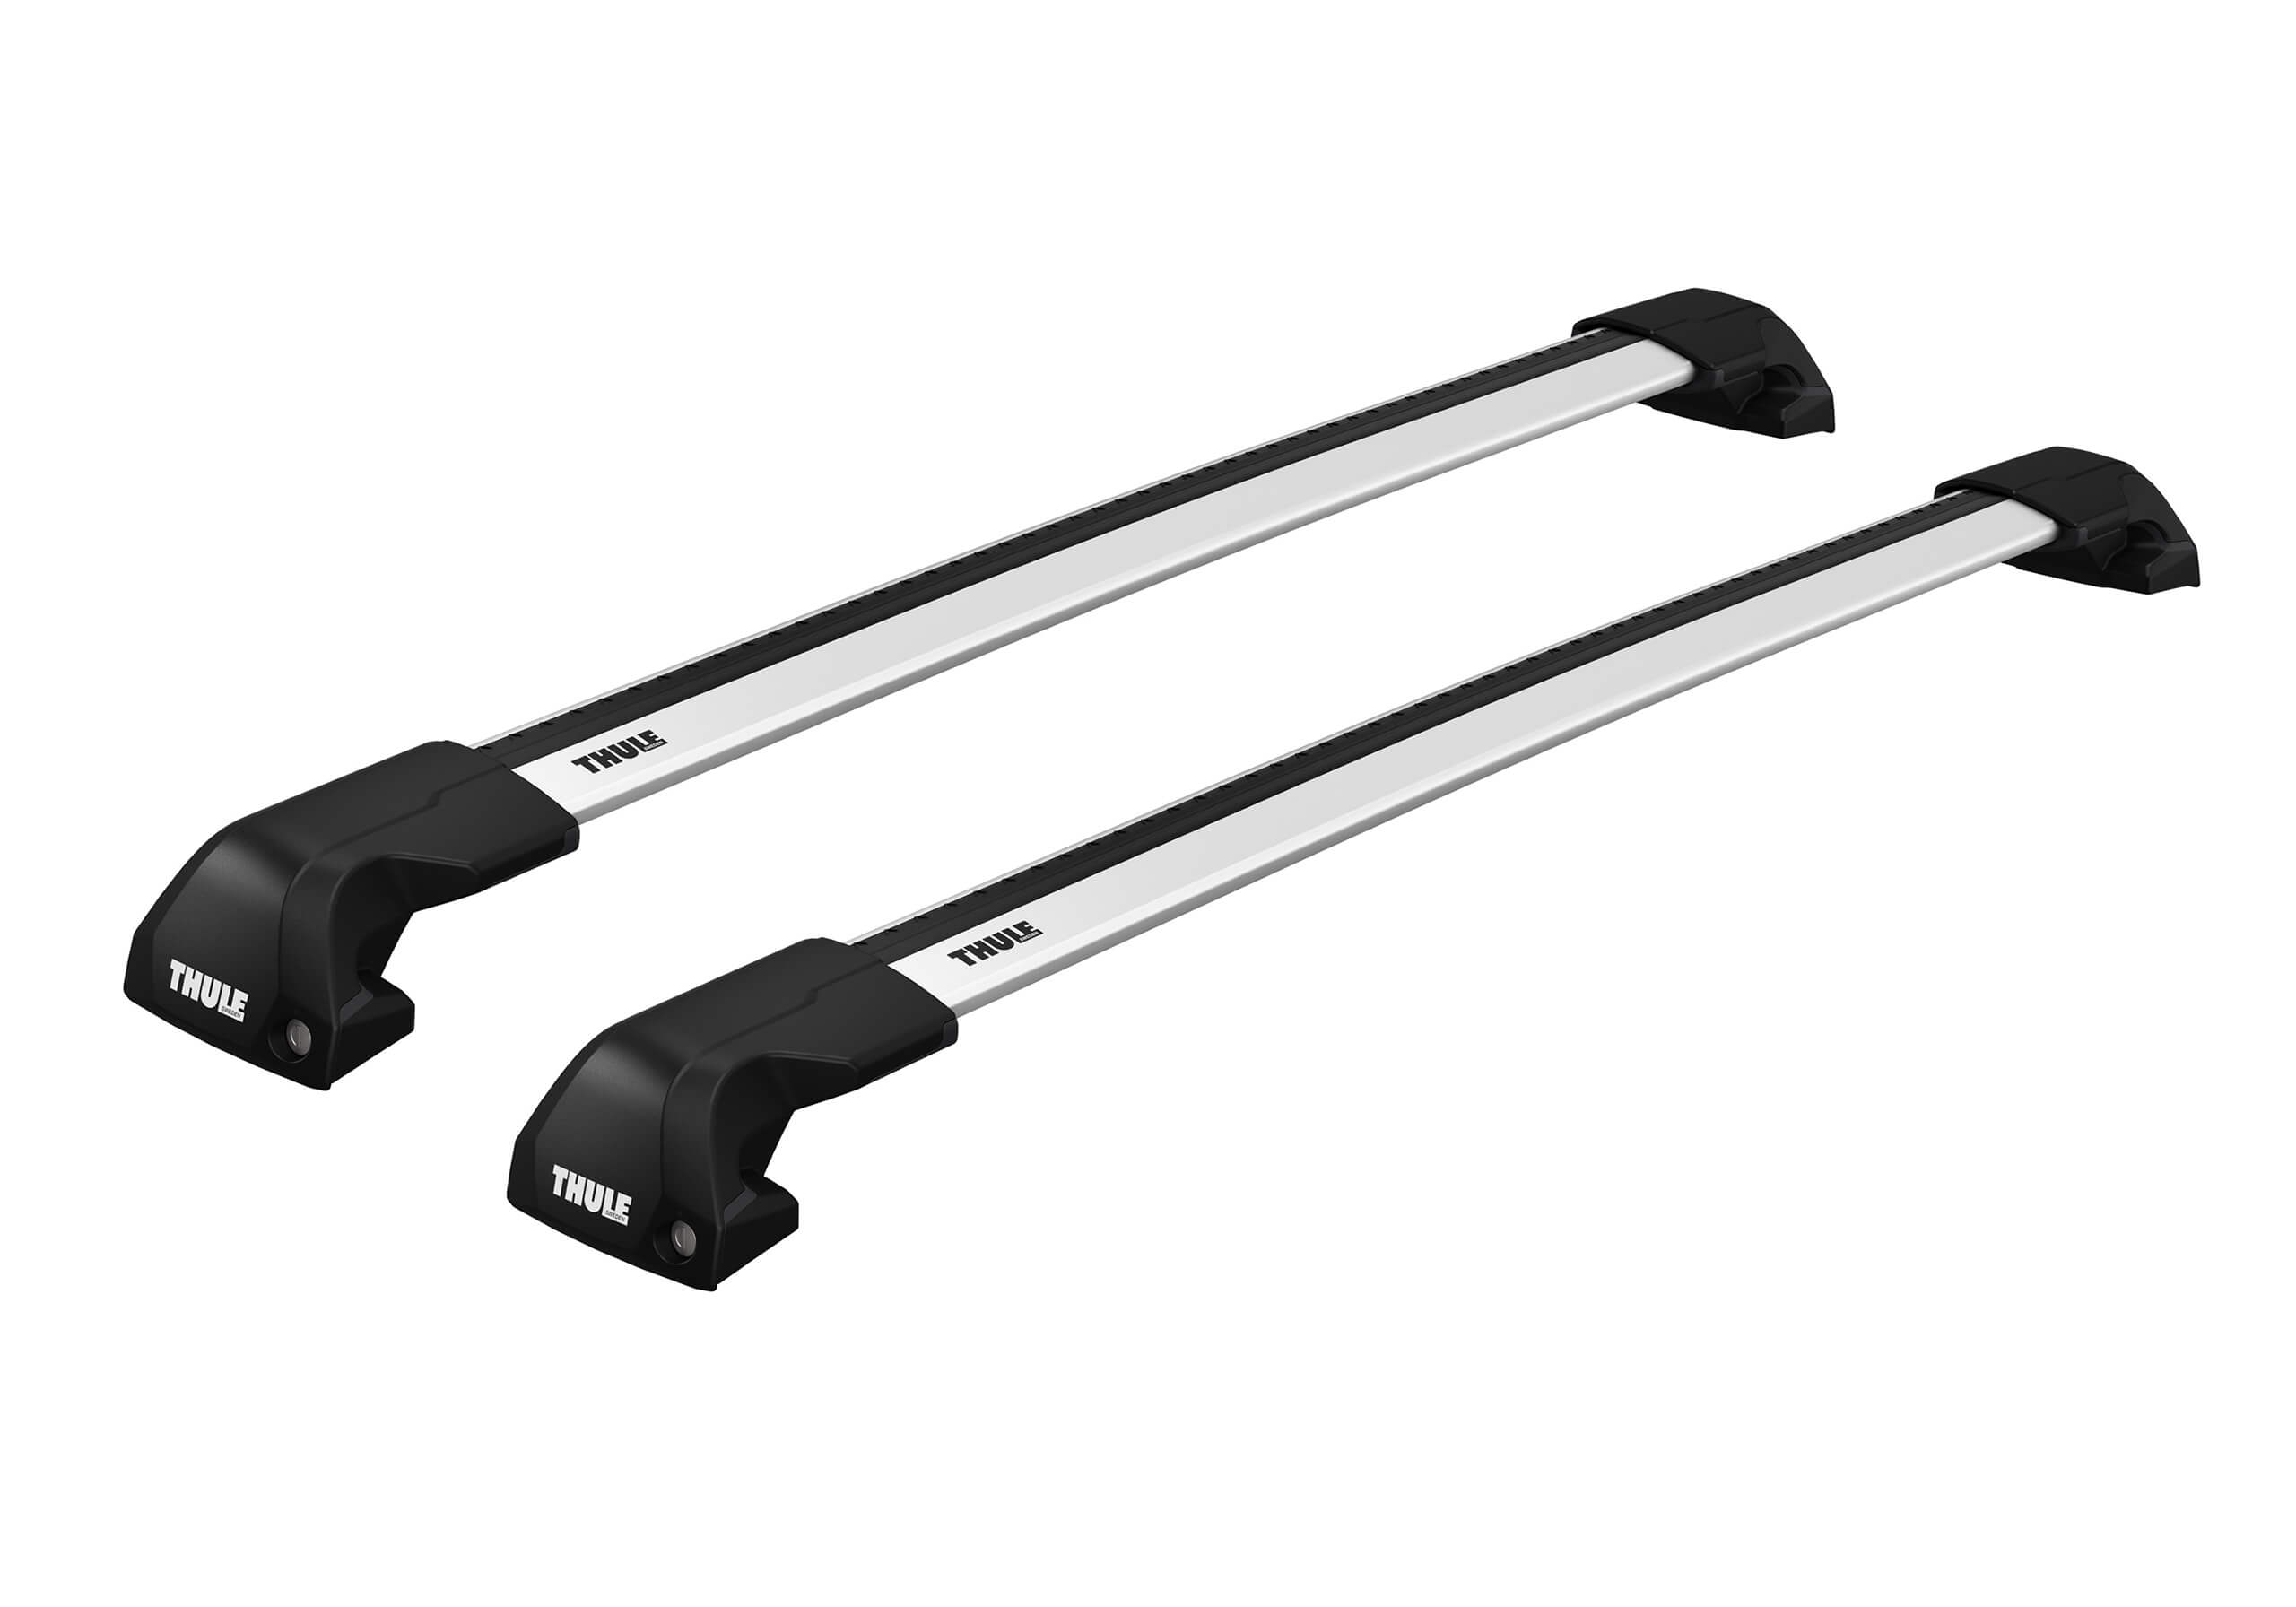 Citroen C4 Grand Picasso (2014 to 2018):Thule Edge silver WingBars package - 7206, 7215 x 2, 6011